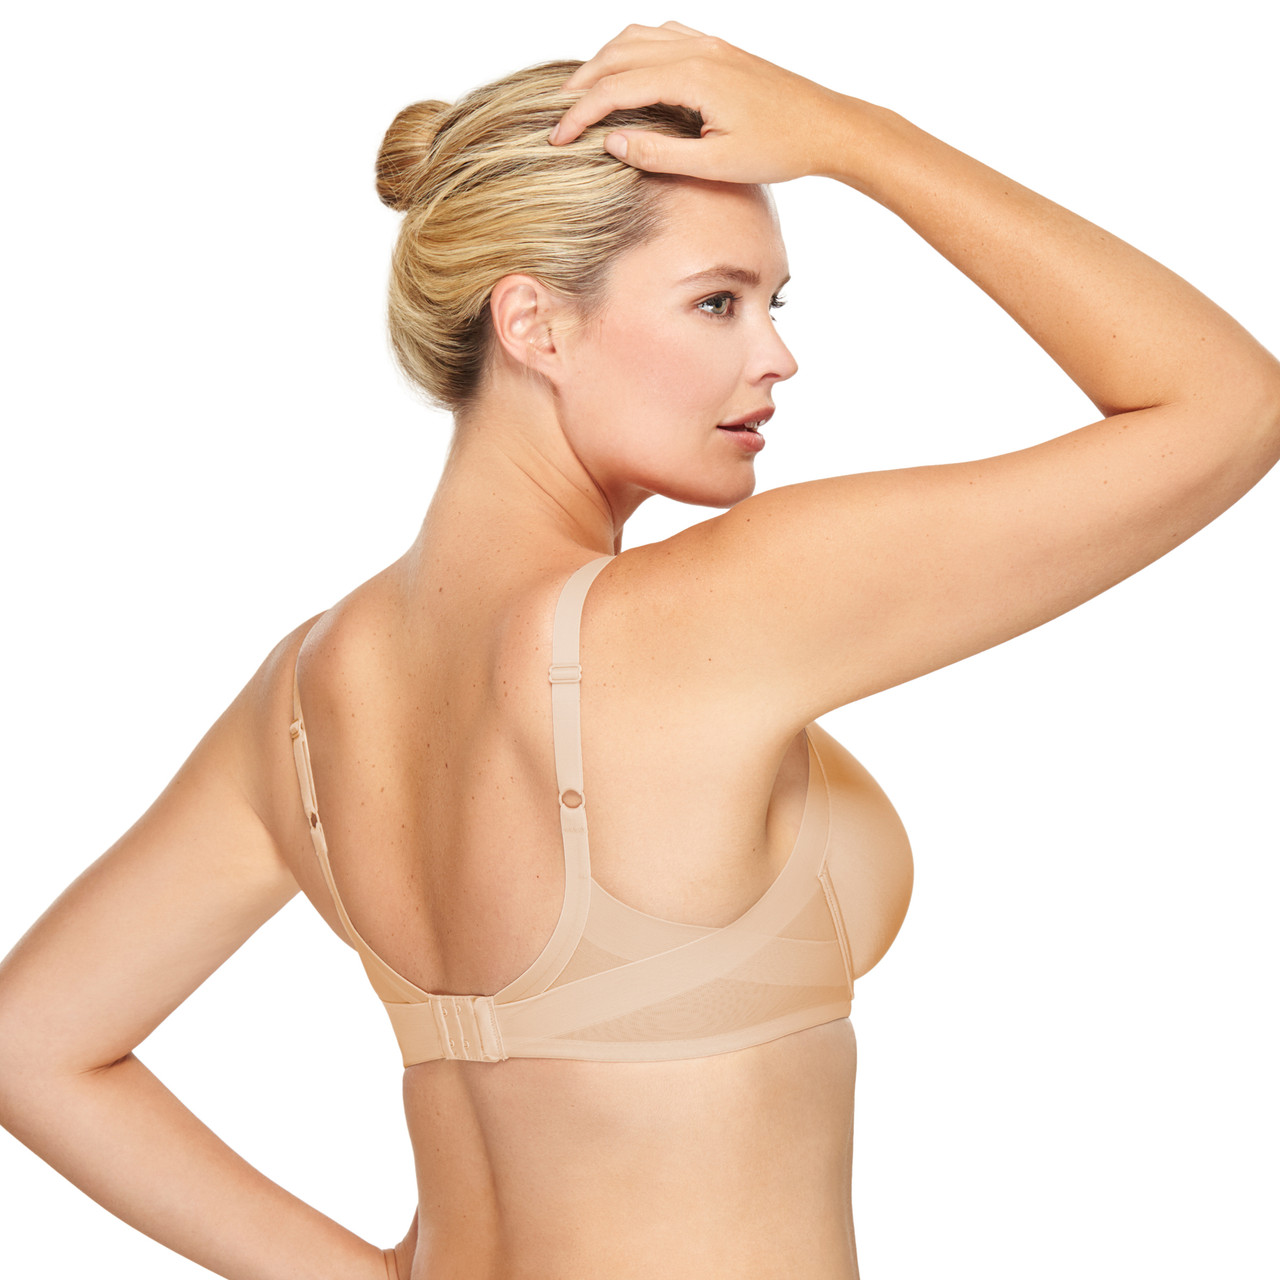 853281 Side Smoother Contour Bra - Lady Slipper Intimate Apparel